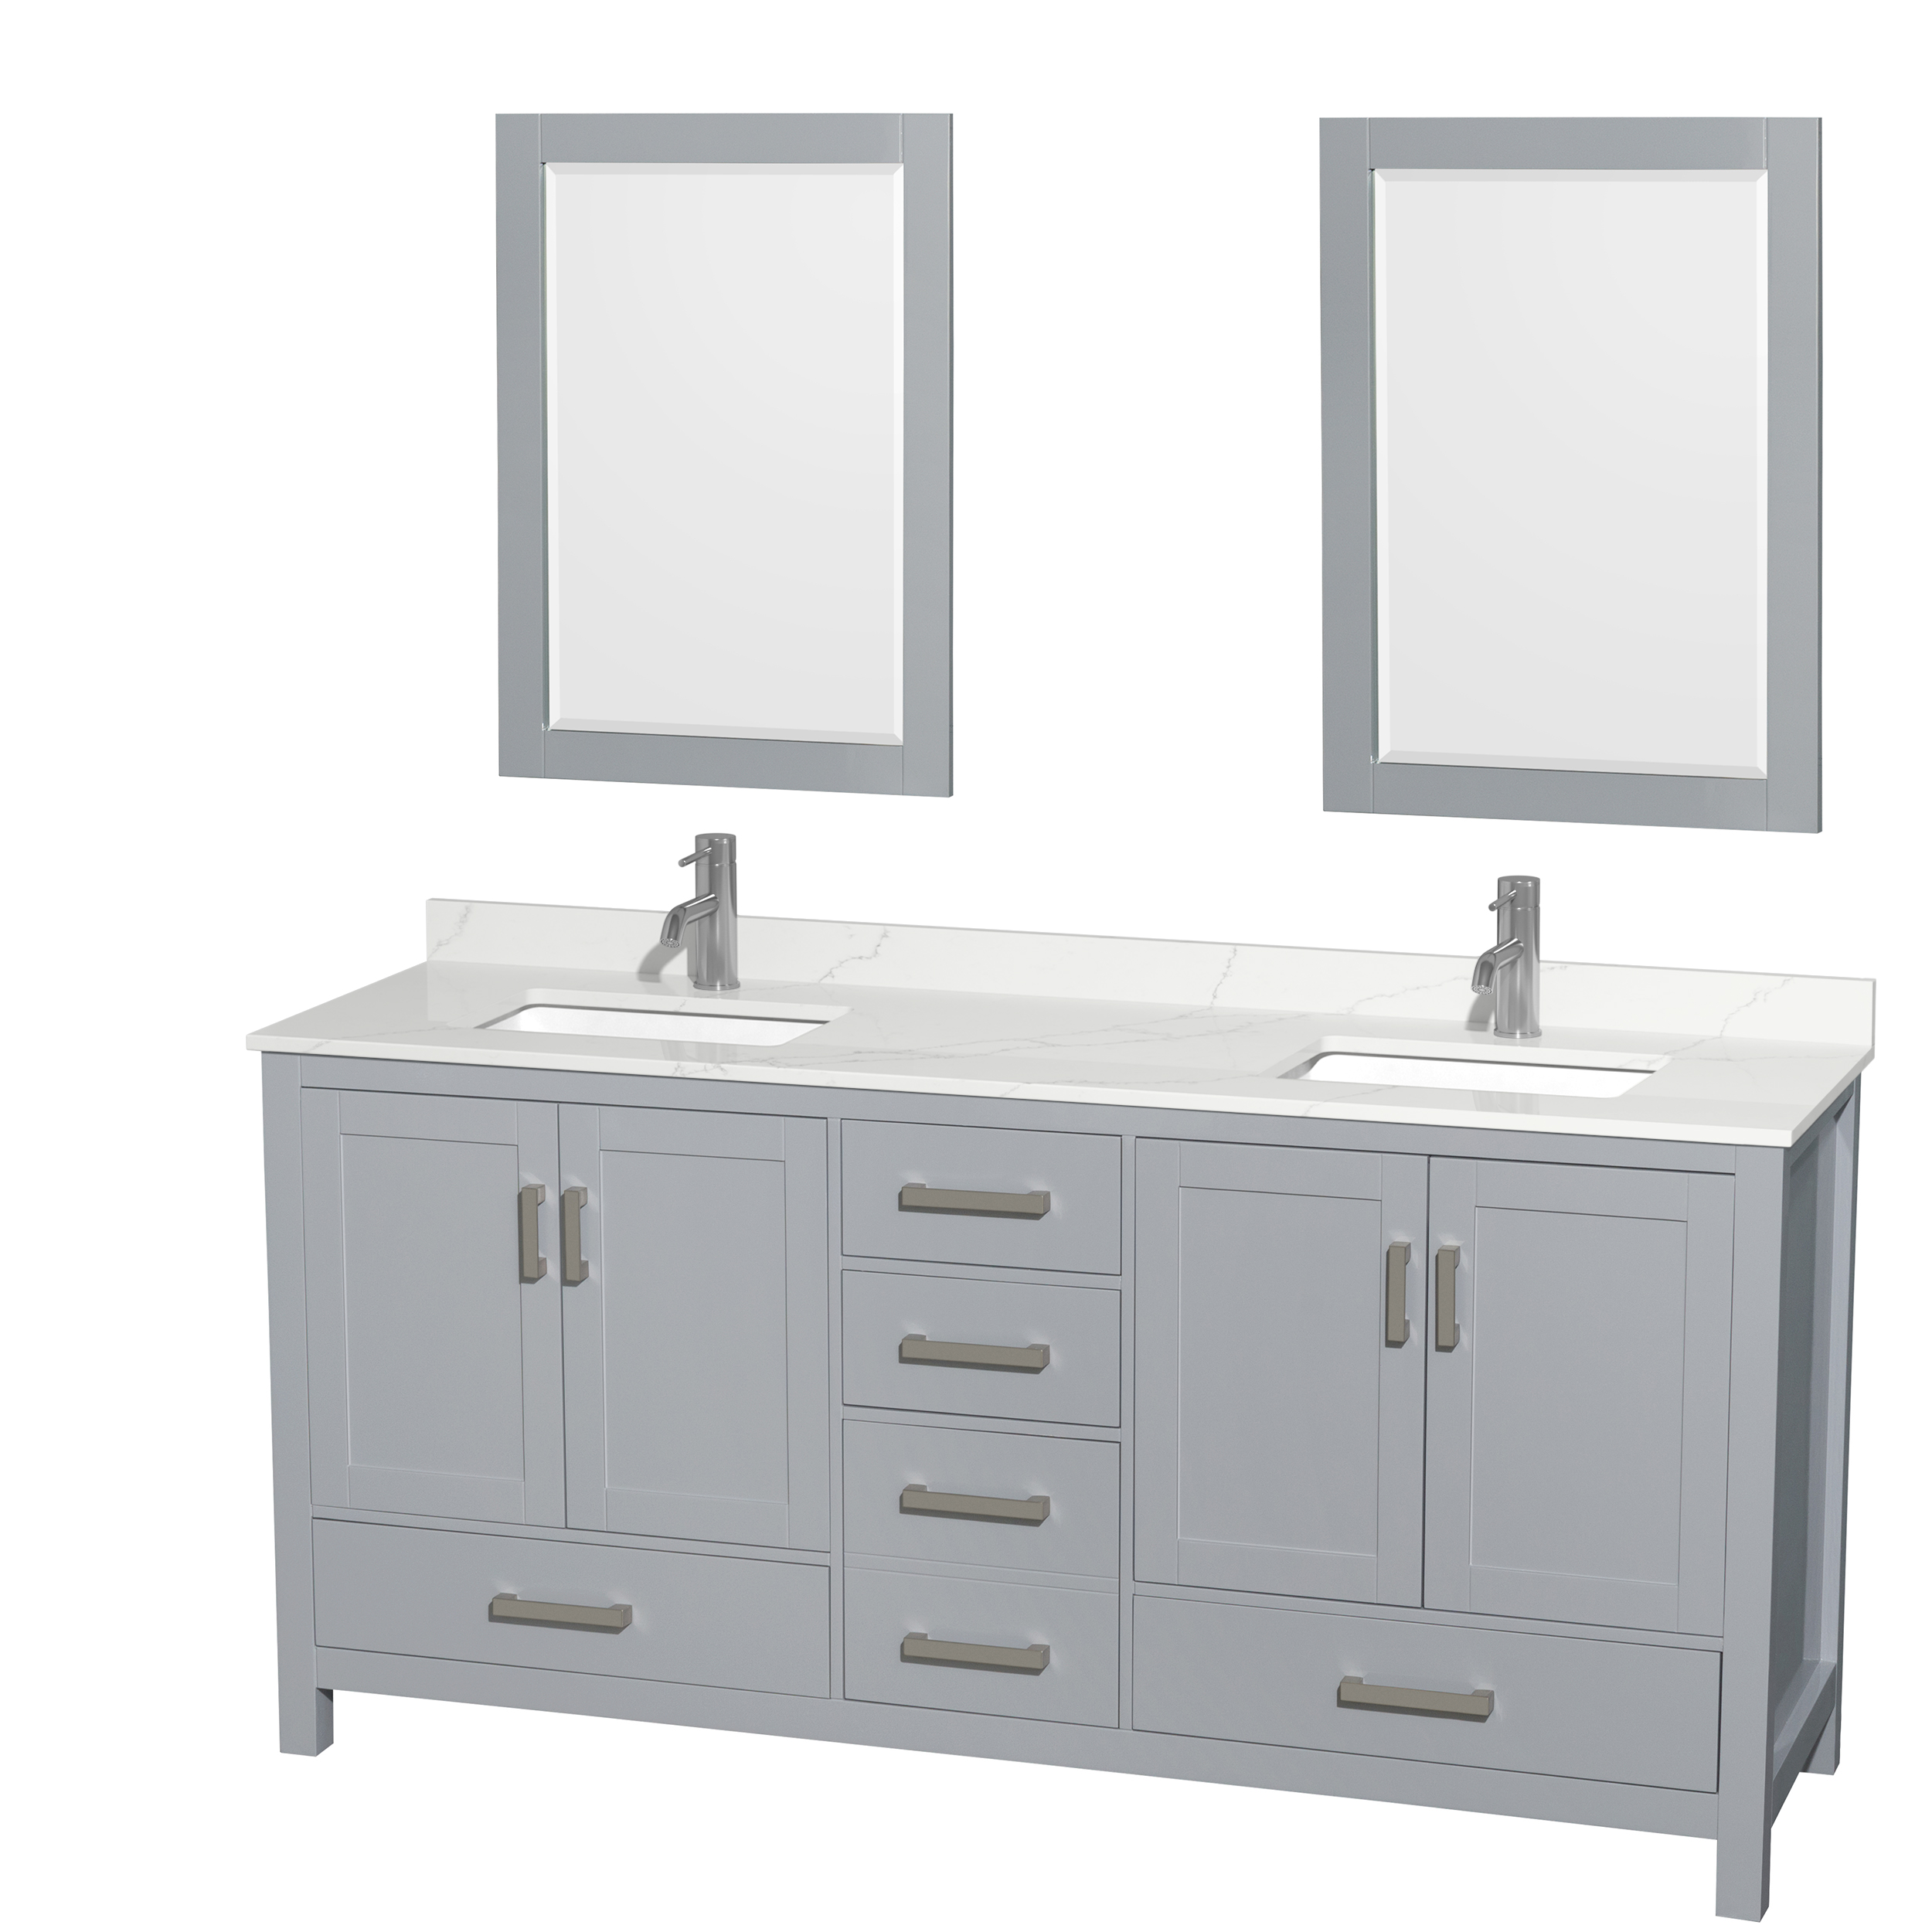 Sheffield 72" Double Bathroom Vanity by Wyndham Collection - Gray WC-1414-72-DBL-VAN-GRY-